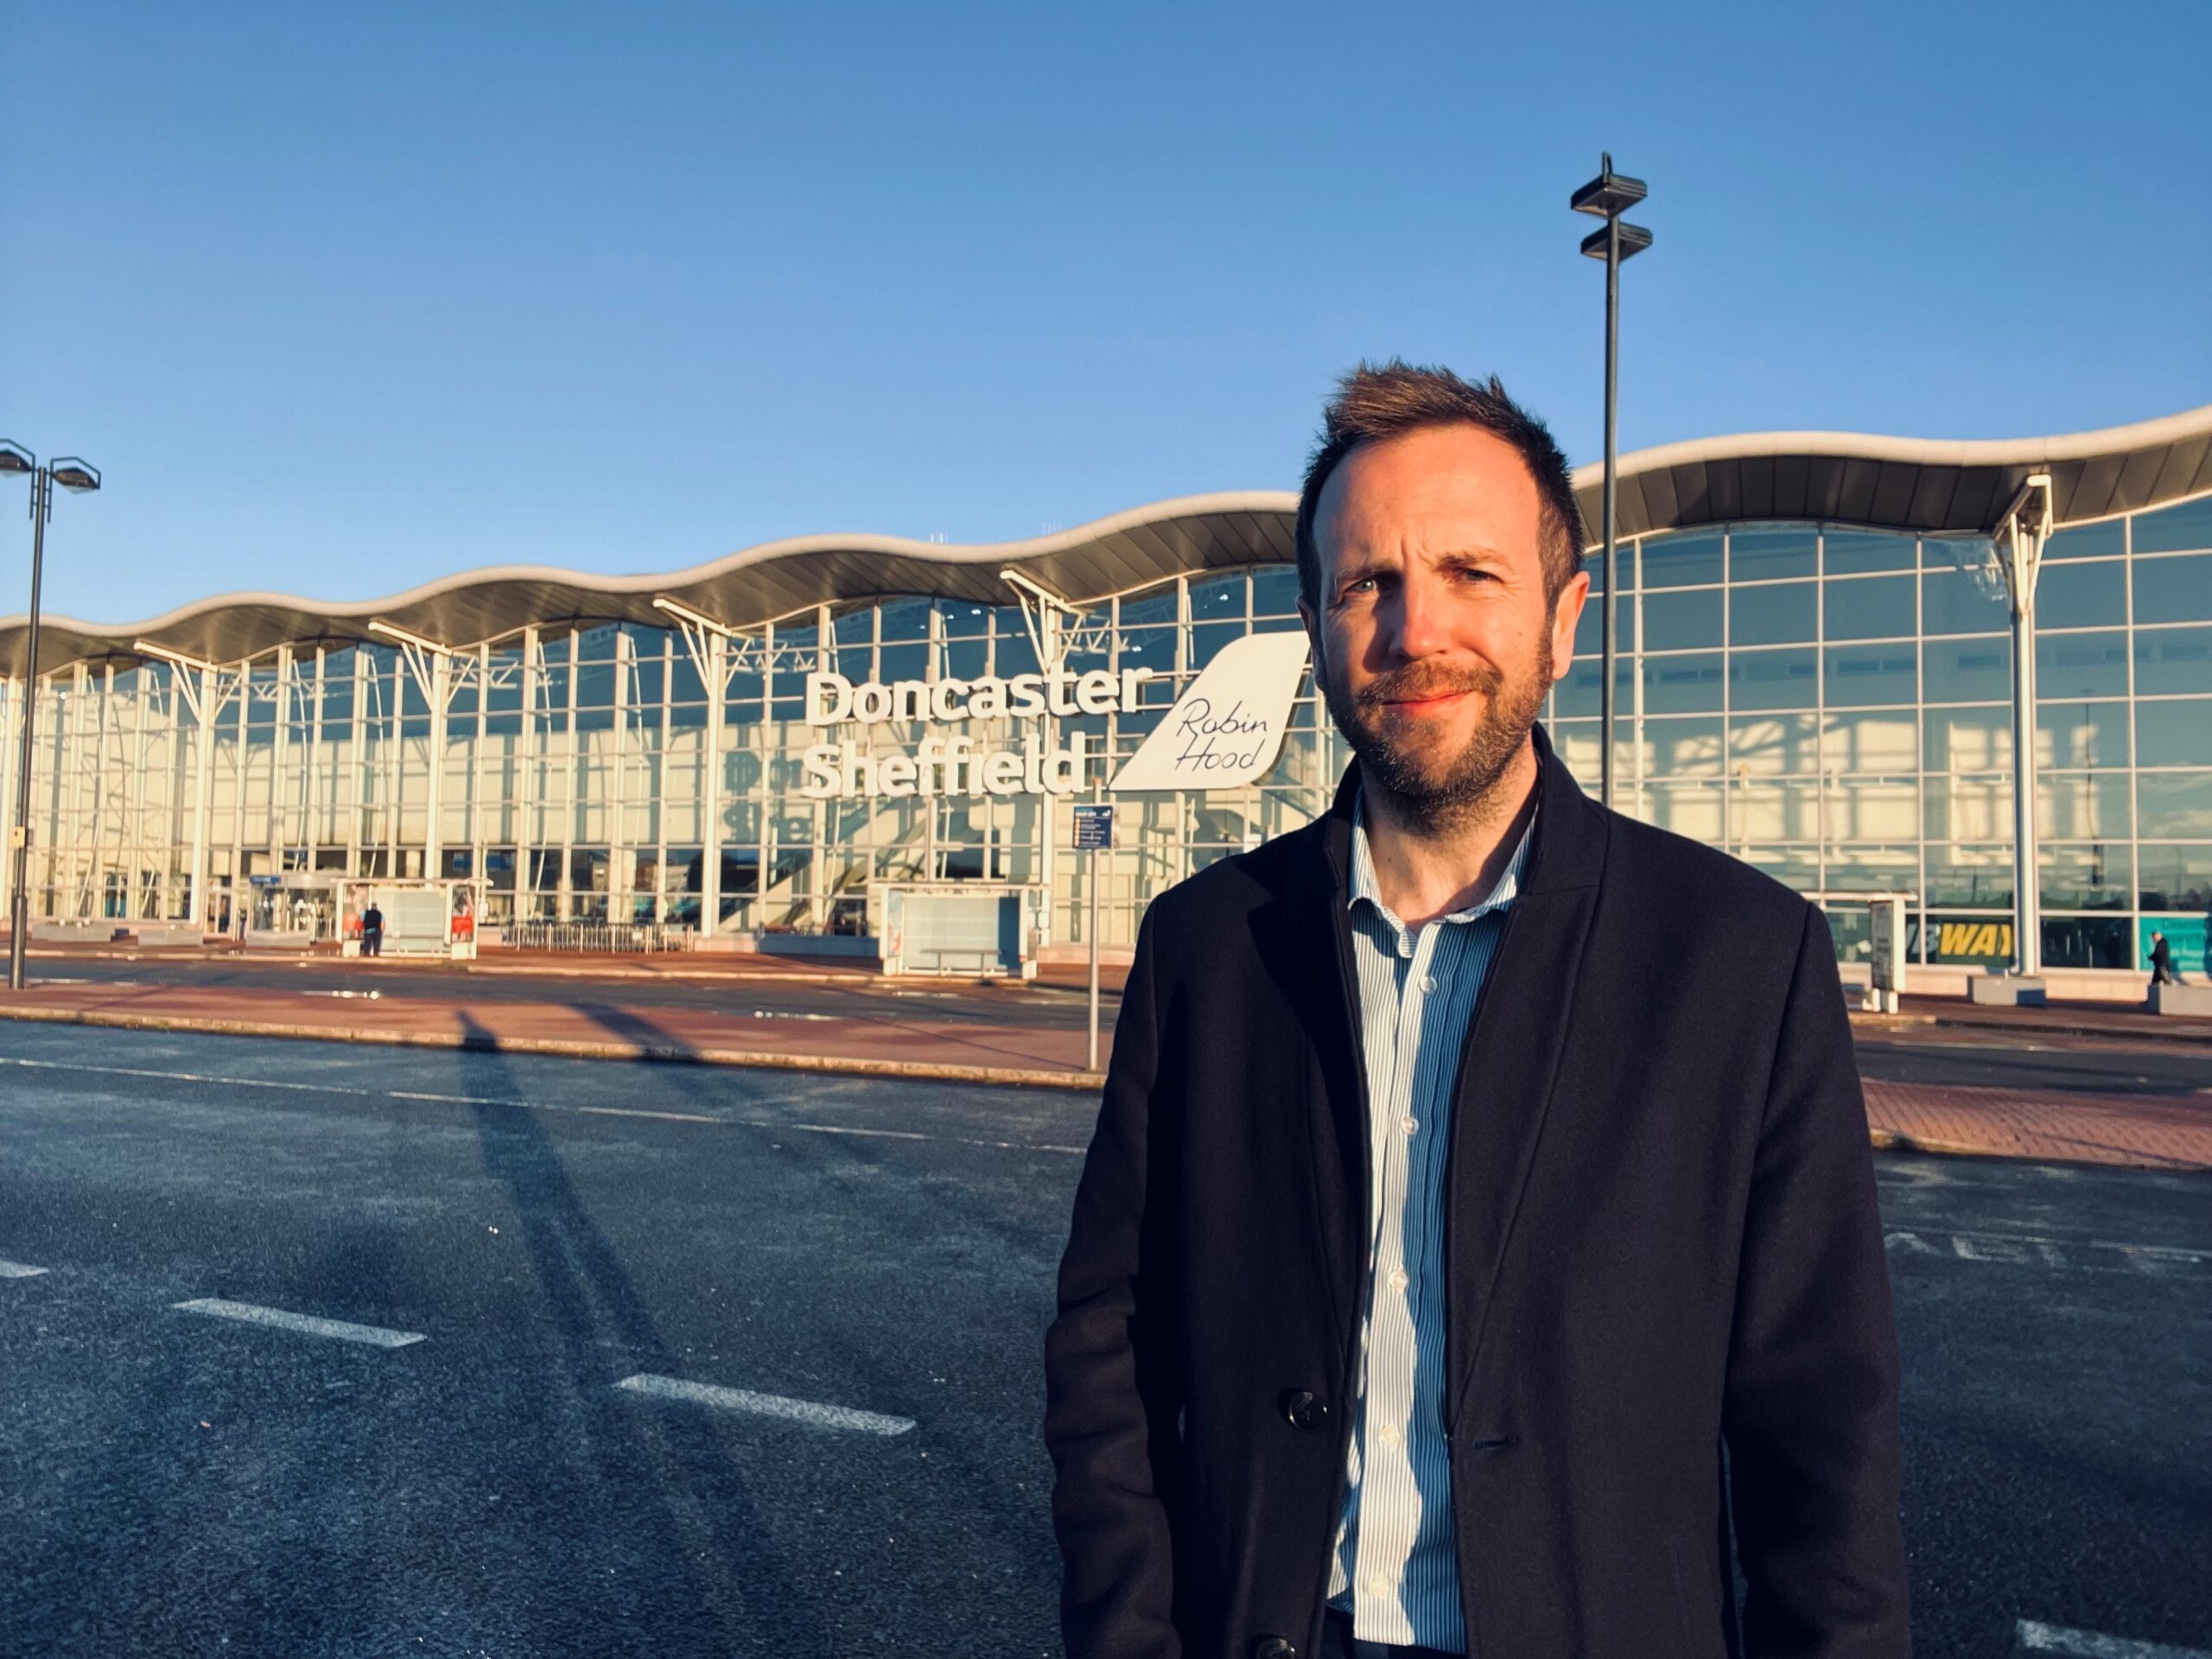 Cllr Ben Miskell outside Doncaster Sheffield Airport